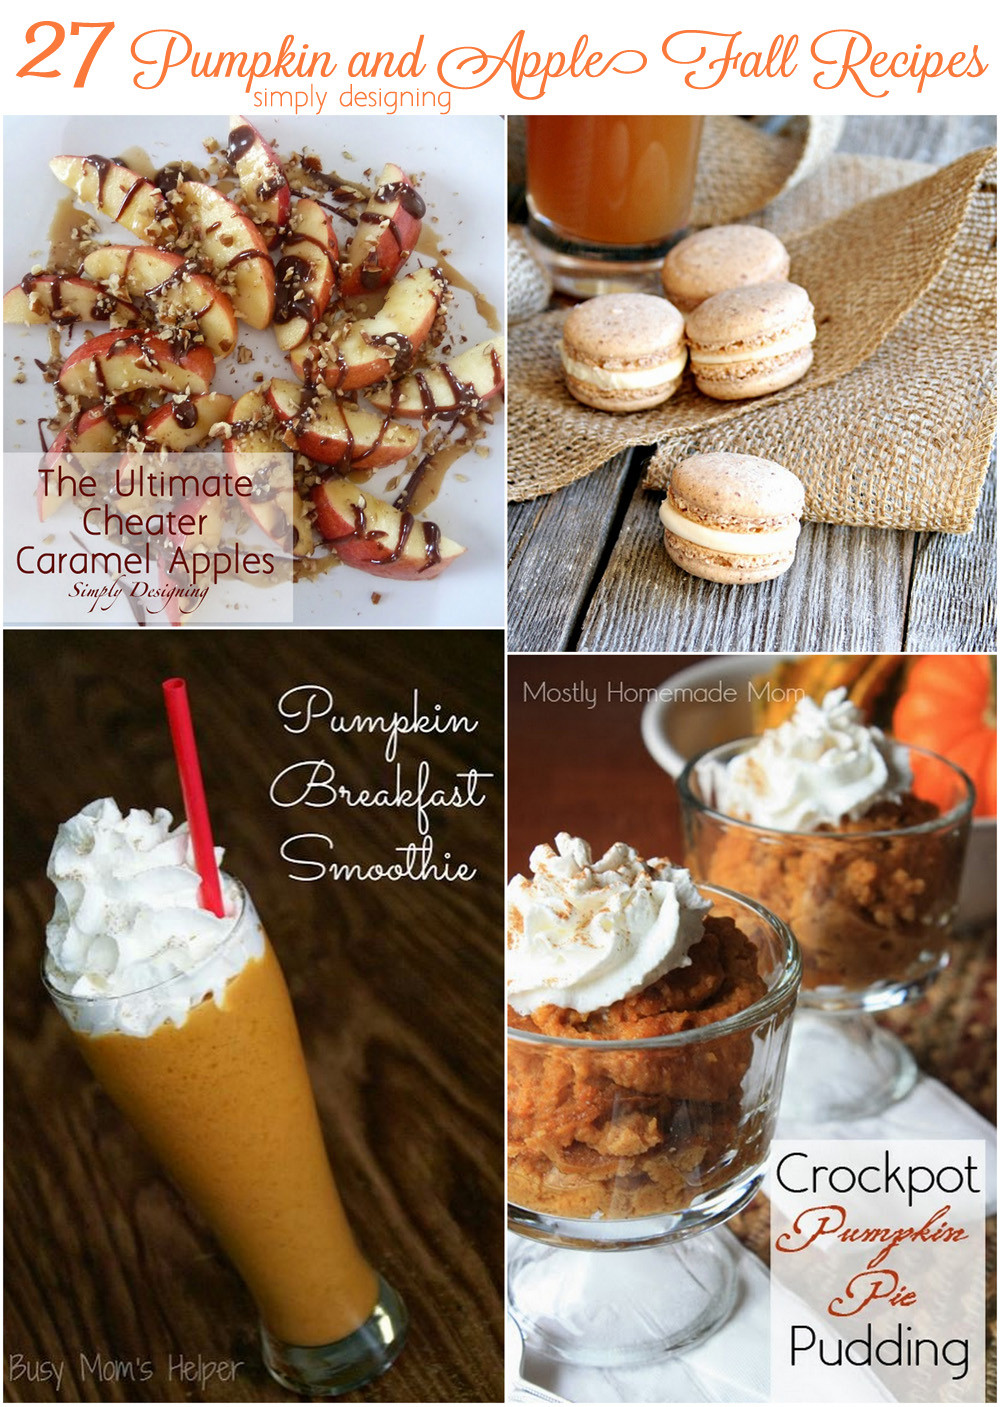 Pumpkin Recipes For Fall
 27 Amazing Apple and Pumpkin Recipes for Fall